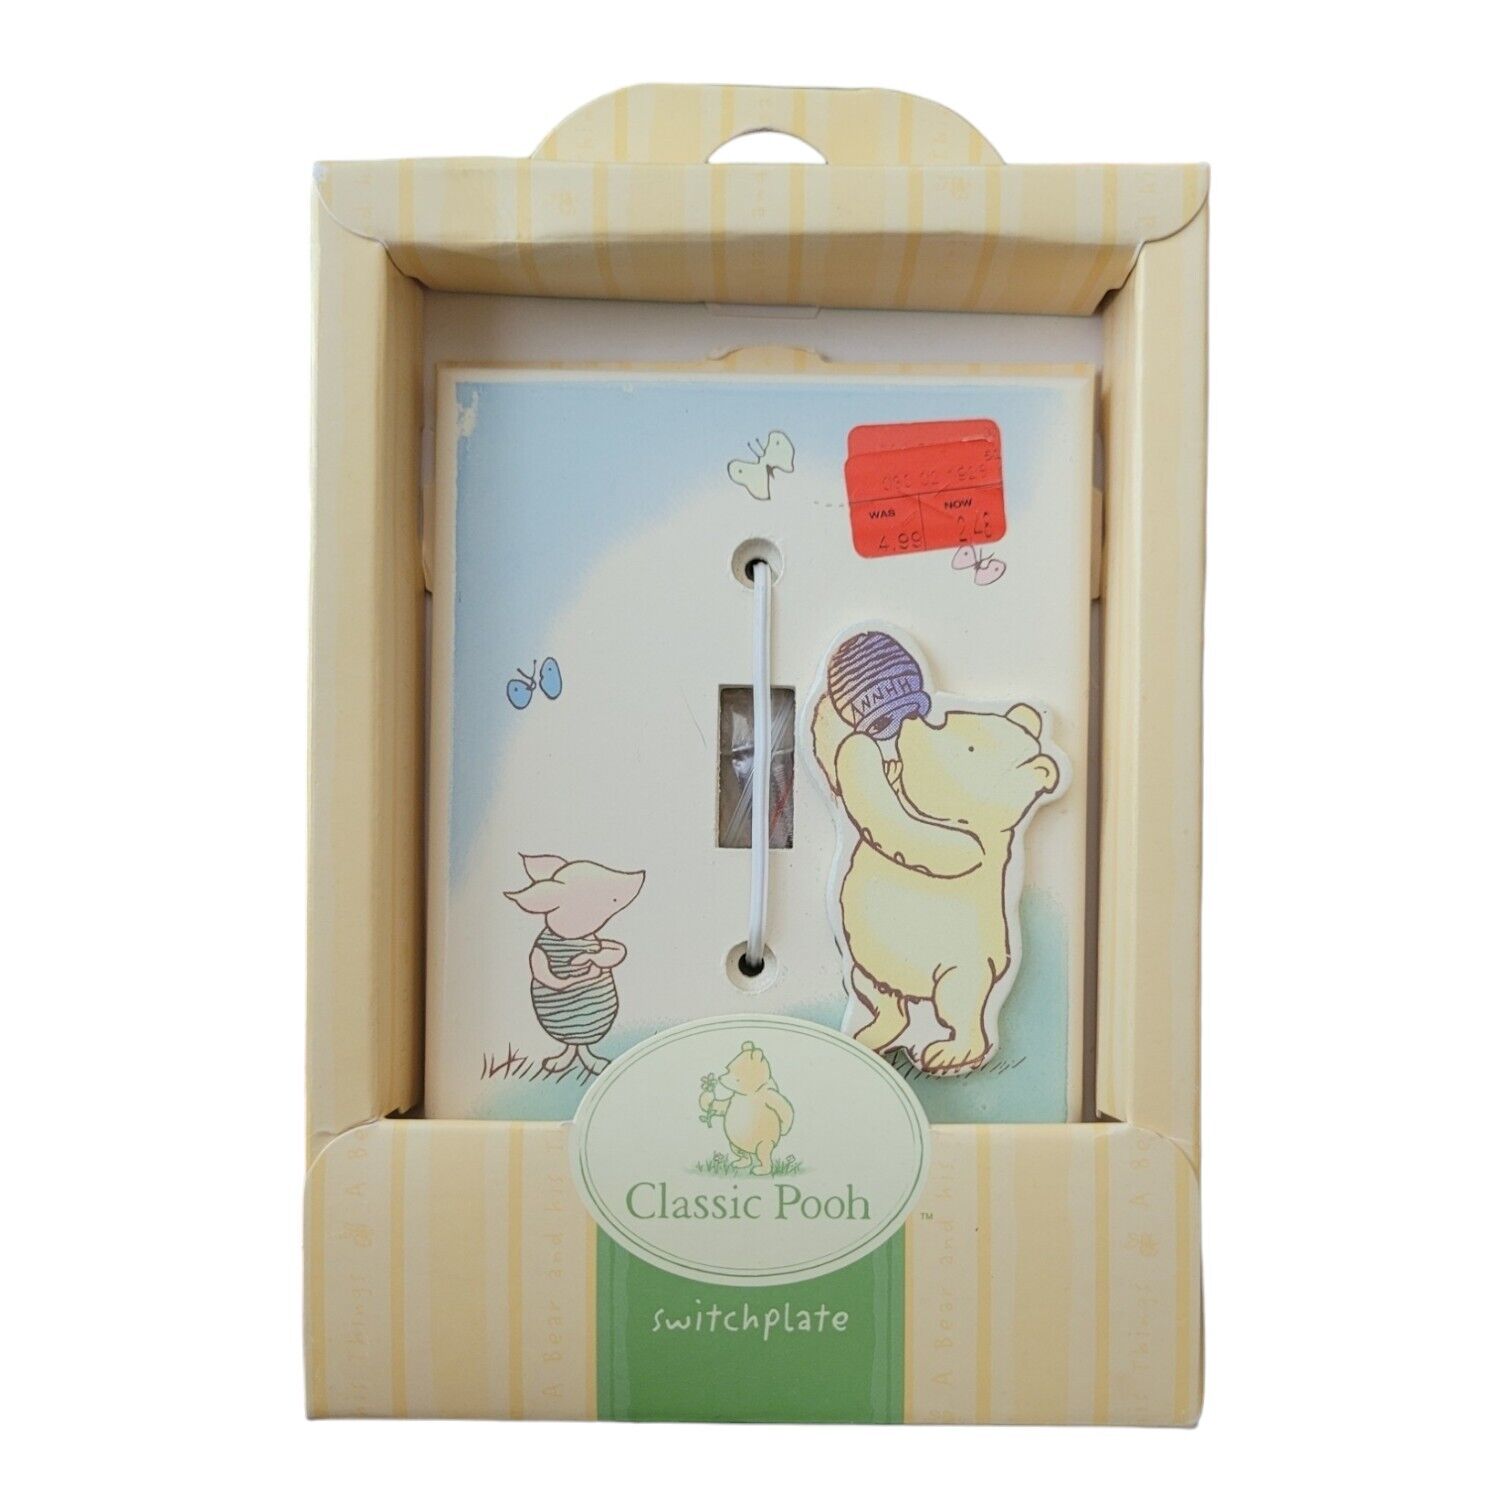 Disney Classic Pooh Bear & Piglet best friends switchplate nursery Collection 